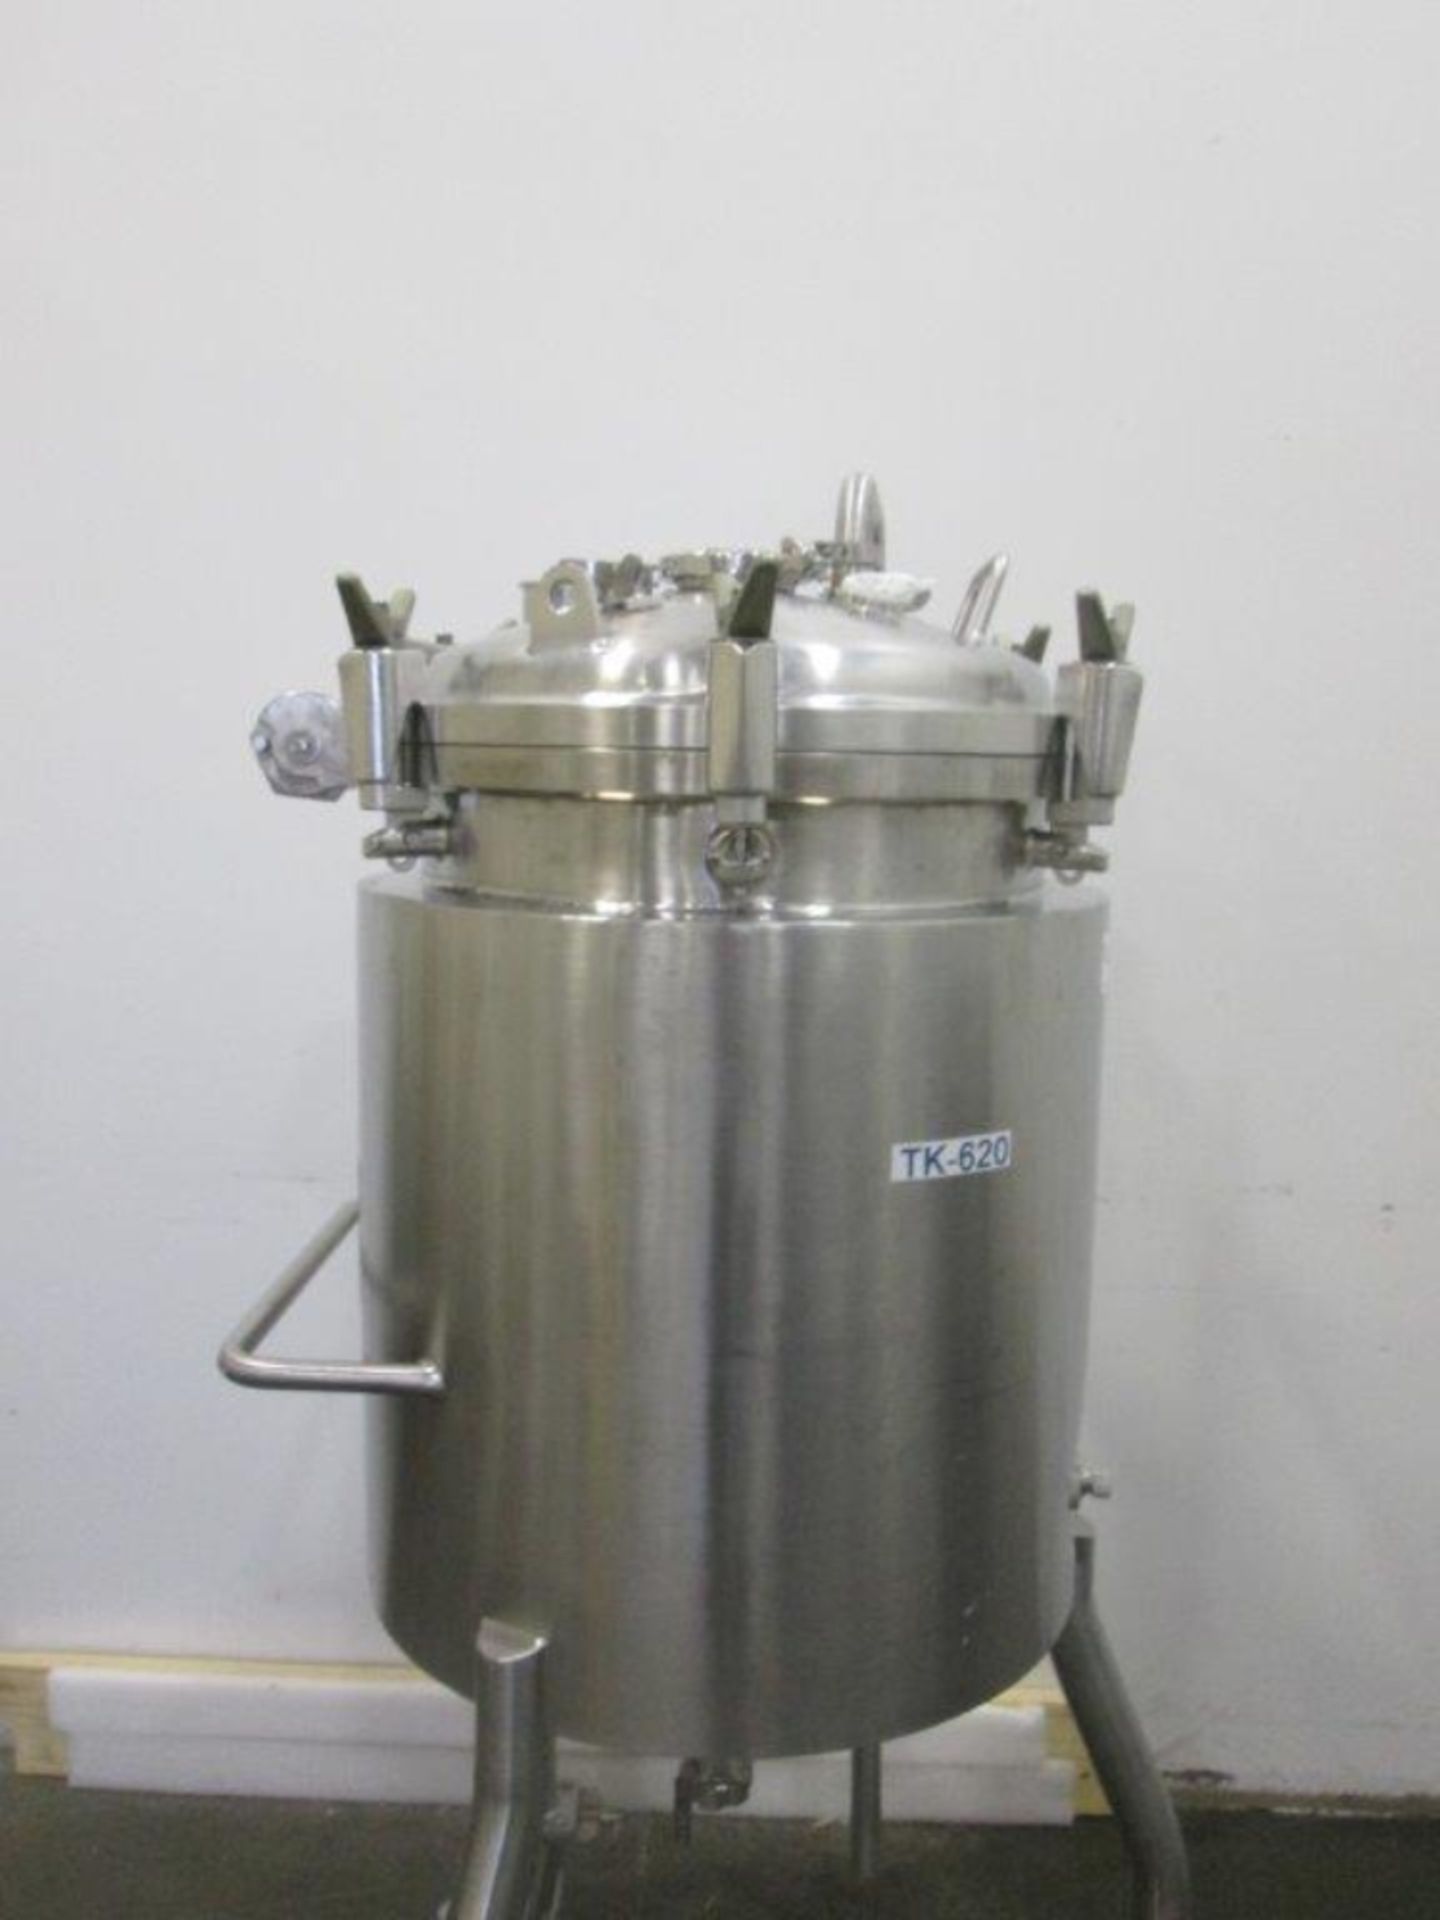 Allegheny Bradford 200L Jacketed Vessel - Image 2 of 6